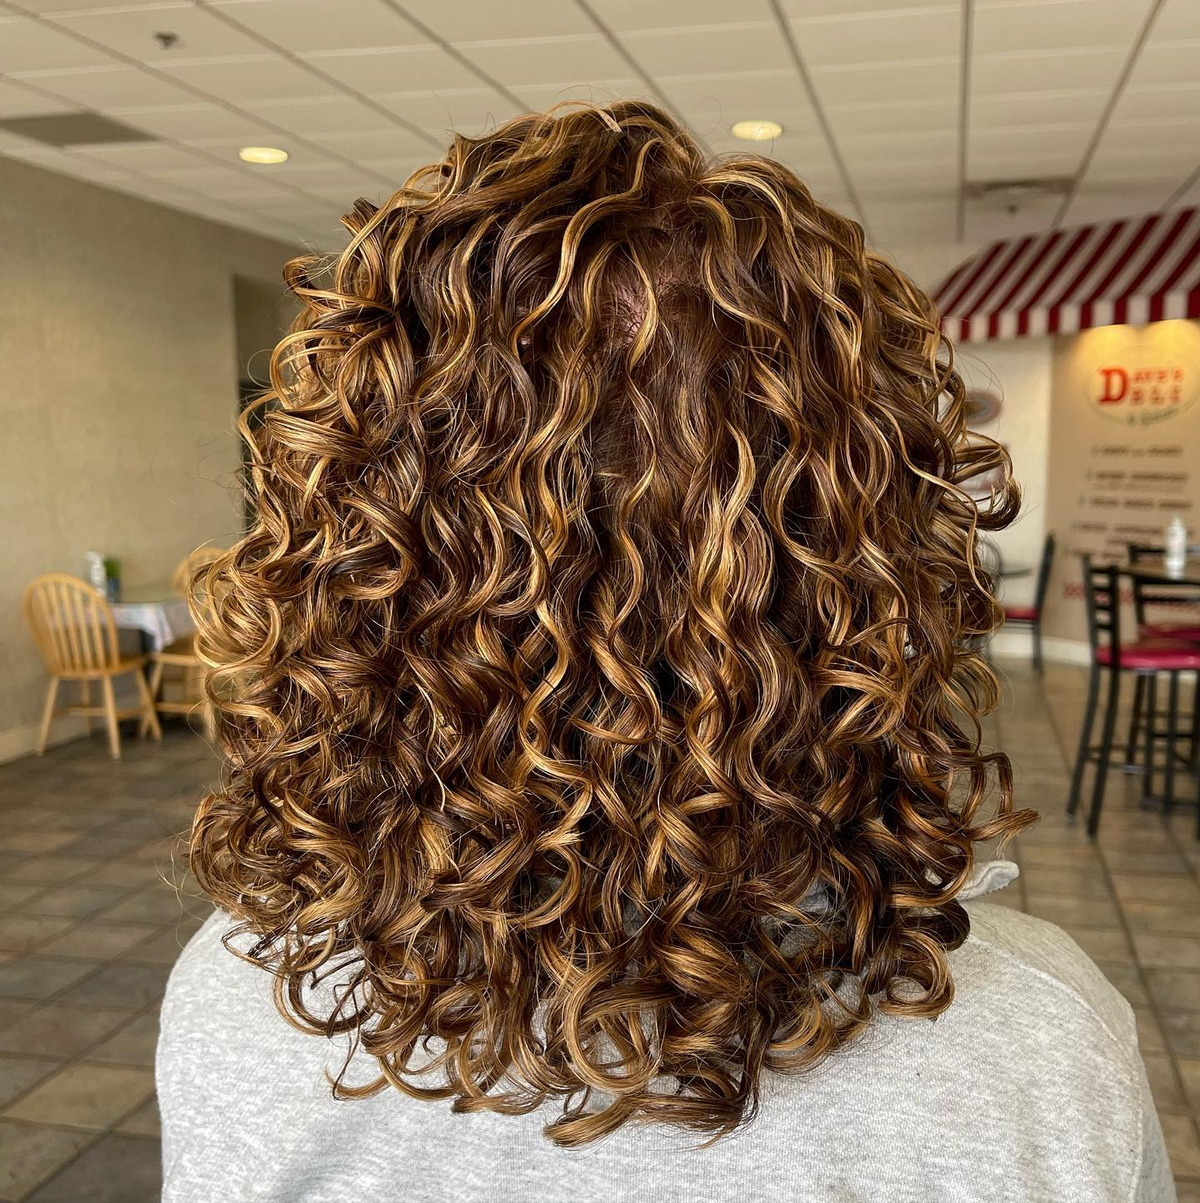 Top Tips To Refresh Curly Hair - Bangstyle - House of Hair Inspiration